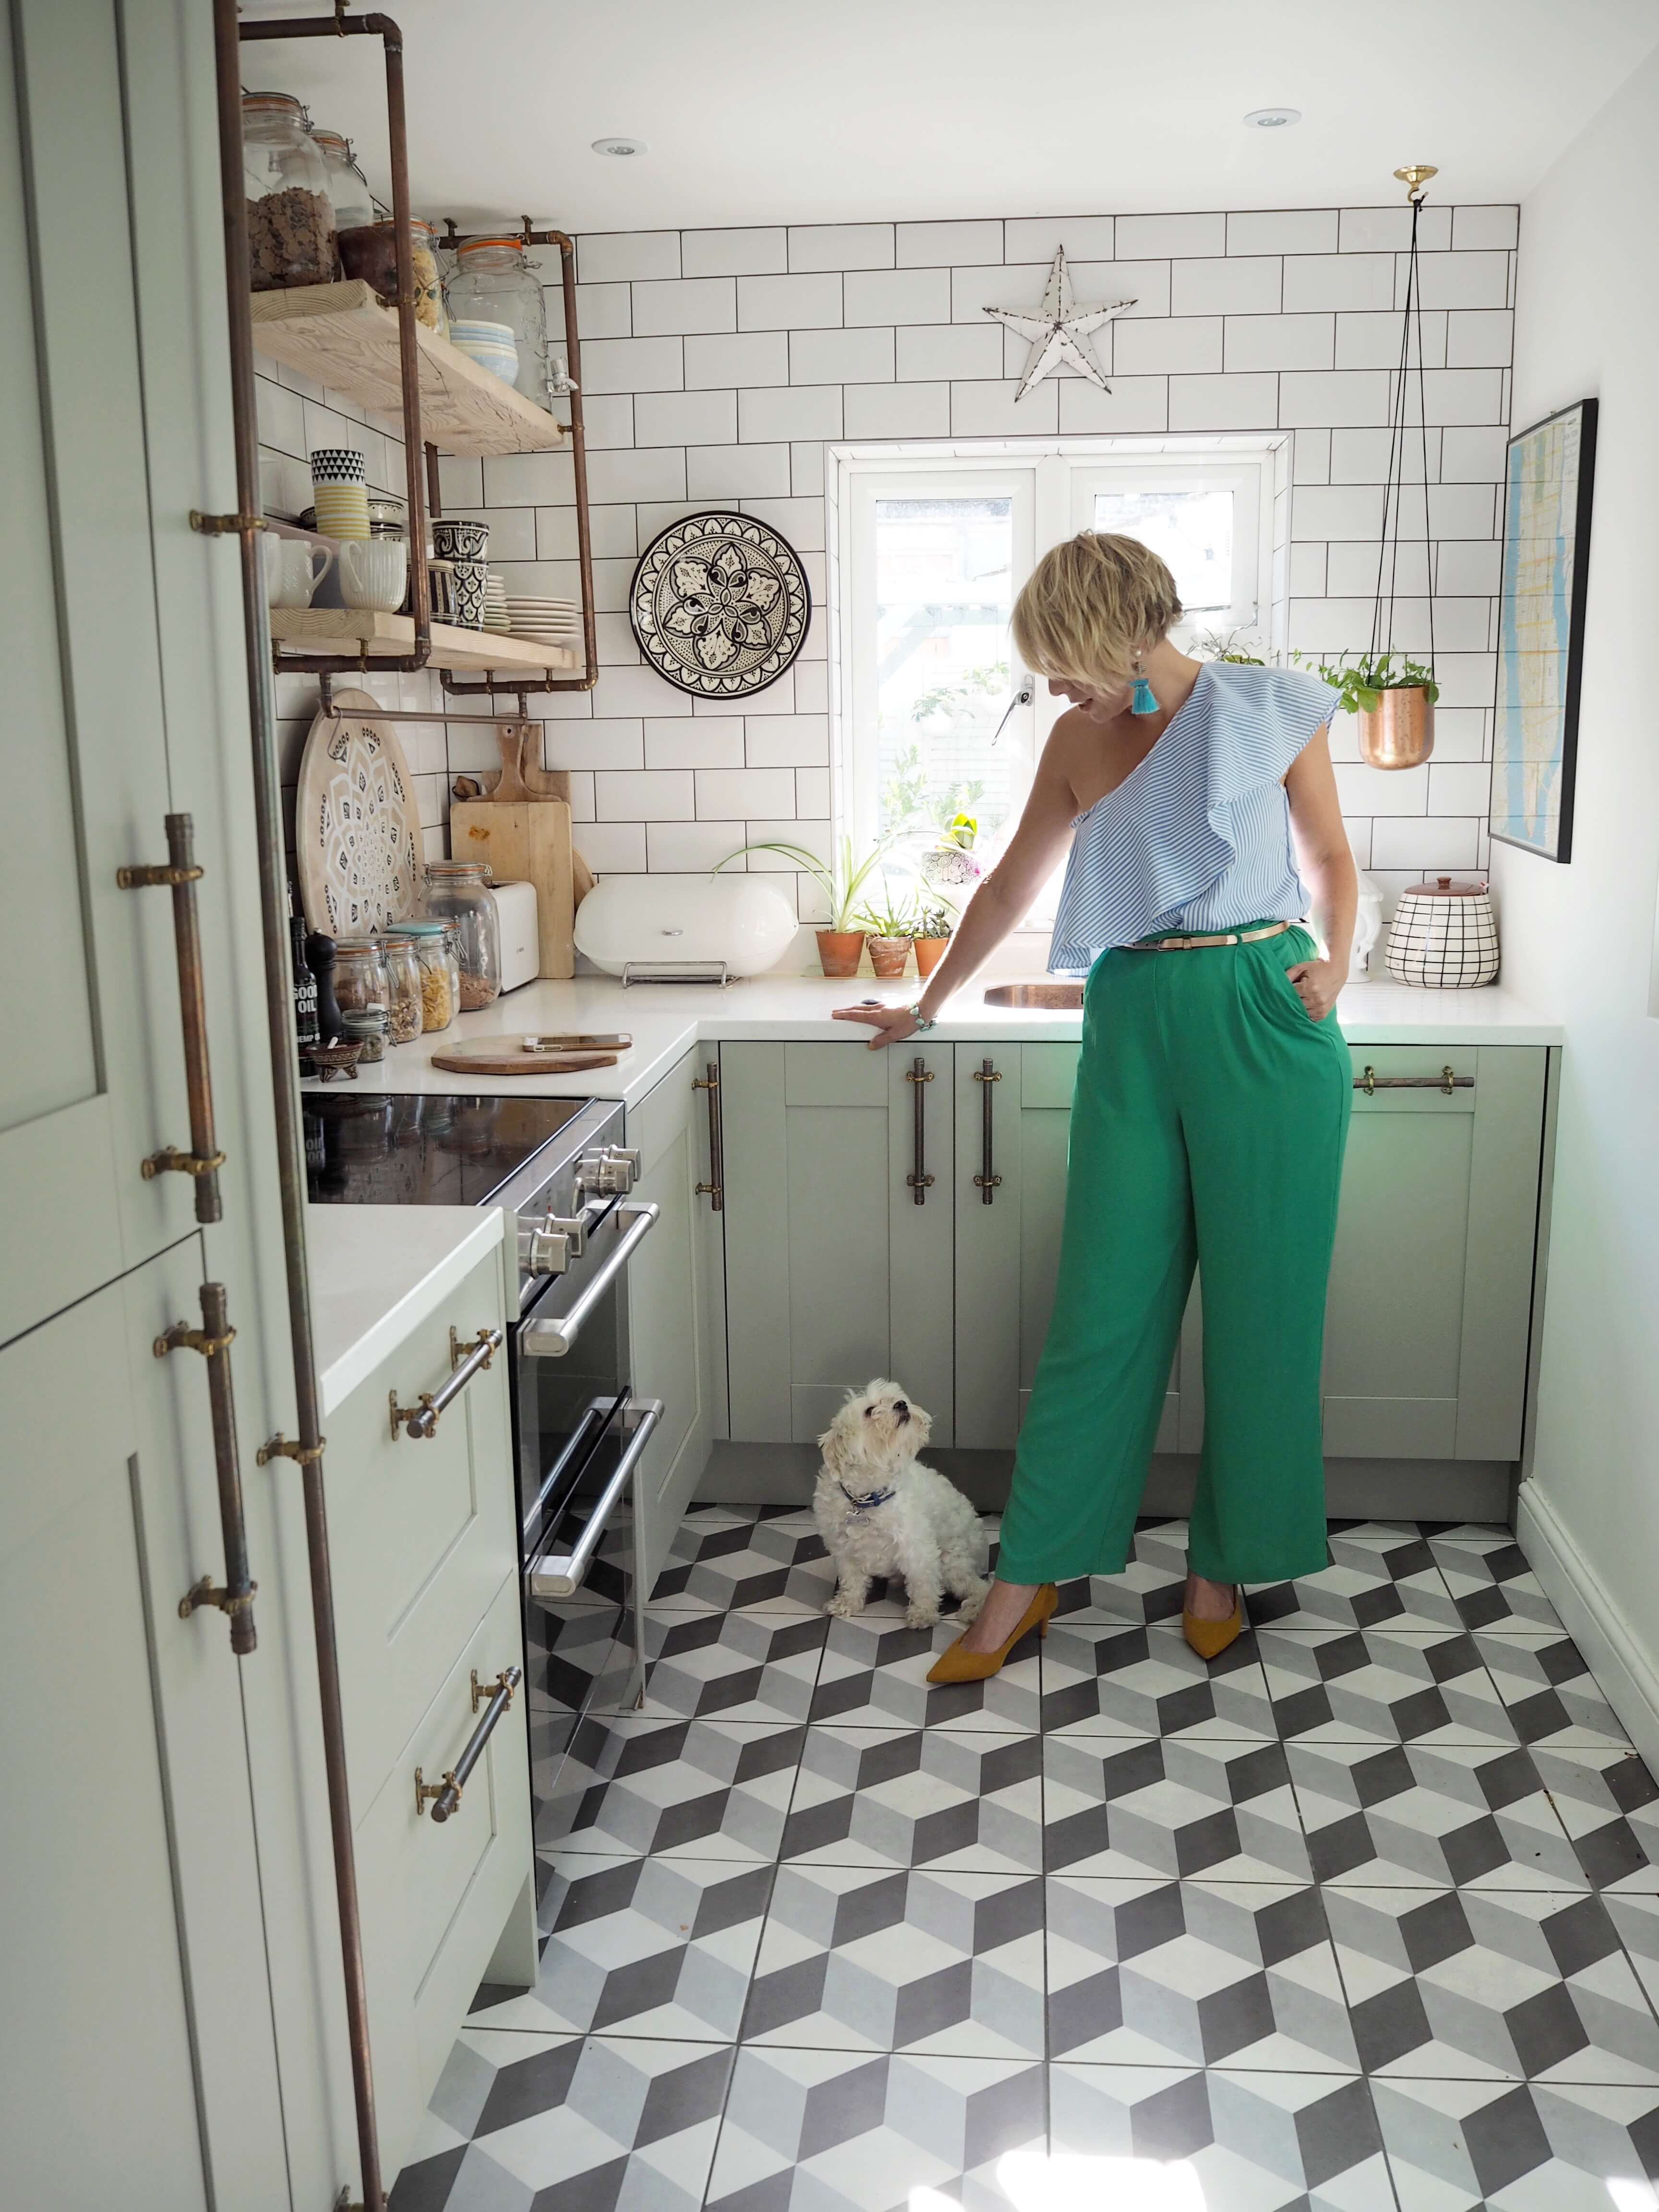 Follow these design tips for small kitchens to create a cool and stylish spaces says Interior Stylist Maxine Brady